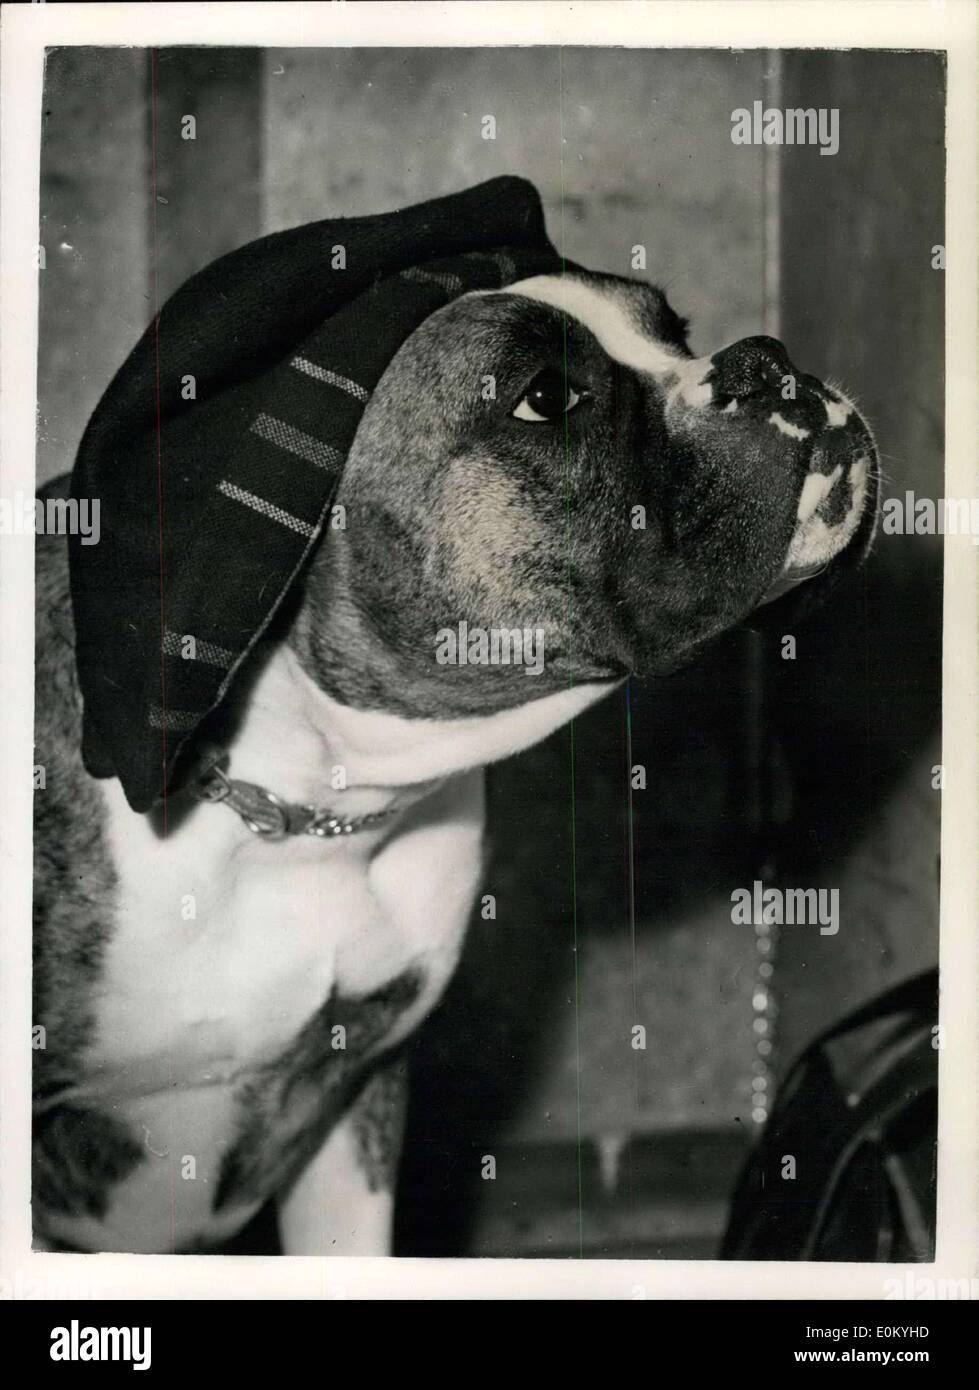 Dec. 03, 1952 - British Boxer Club Show At Lime Grove Hall Keeping His Head Warm. Photo shows Champion Panfield Awldogg Attar owned by Mrs. M.E. Bull of Bishop's Storford - finds this hat keeps his head warm - as he awaits his turn to be judged - at the British Boxer Club Show held at Lime Grove Mall, this morning. Stock Photo